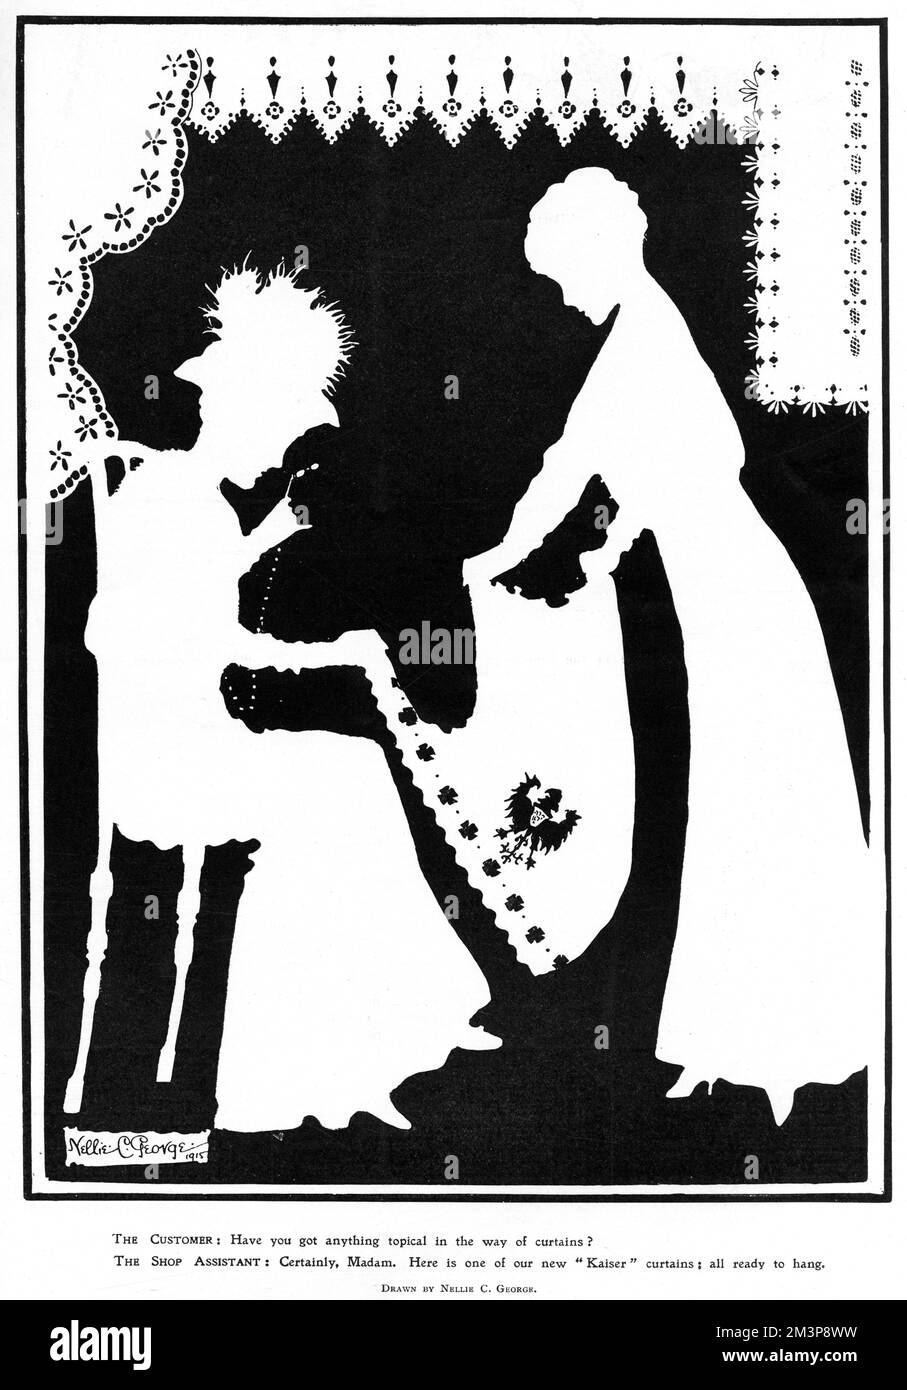 The Customer: Have you got anything topical in the way of curtains?  The Shop Assistant: Certainly Madam, Here is one of our new 'Kaiser' curtains; all ready to hang.     A humorous play on words as a shop assistant shows a customer a new design of curtains embellished with the Imperial Eagle.       Date: 1915 Stock Photo